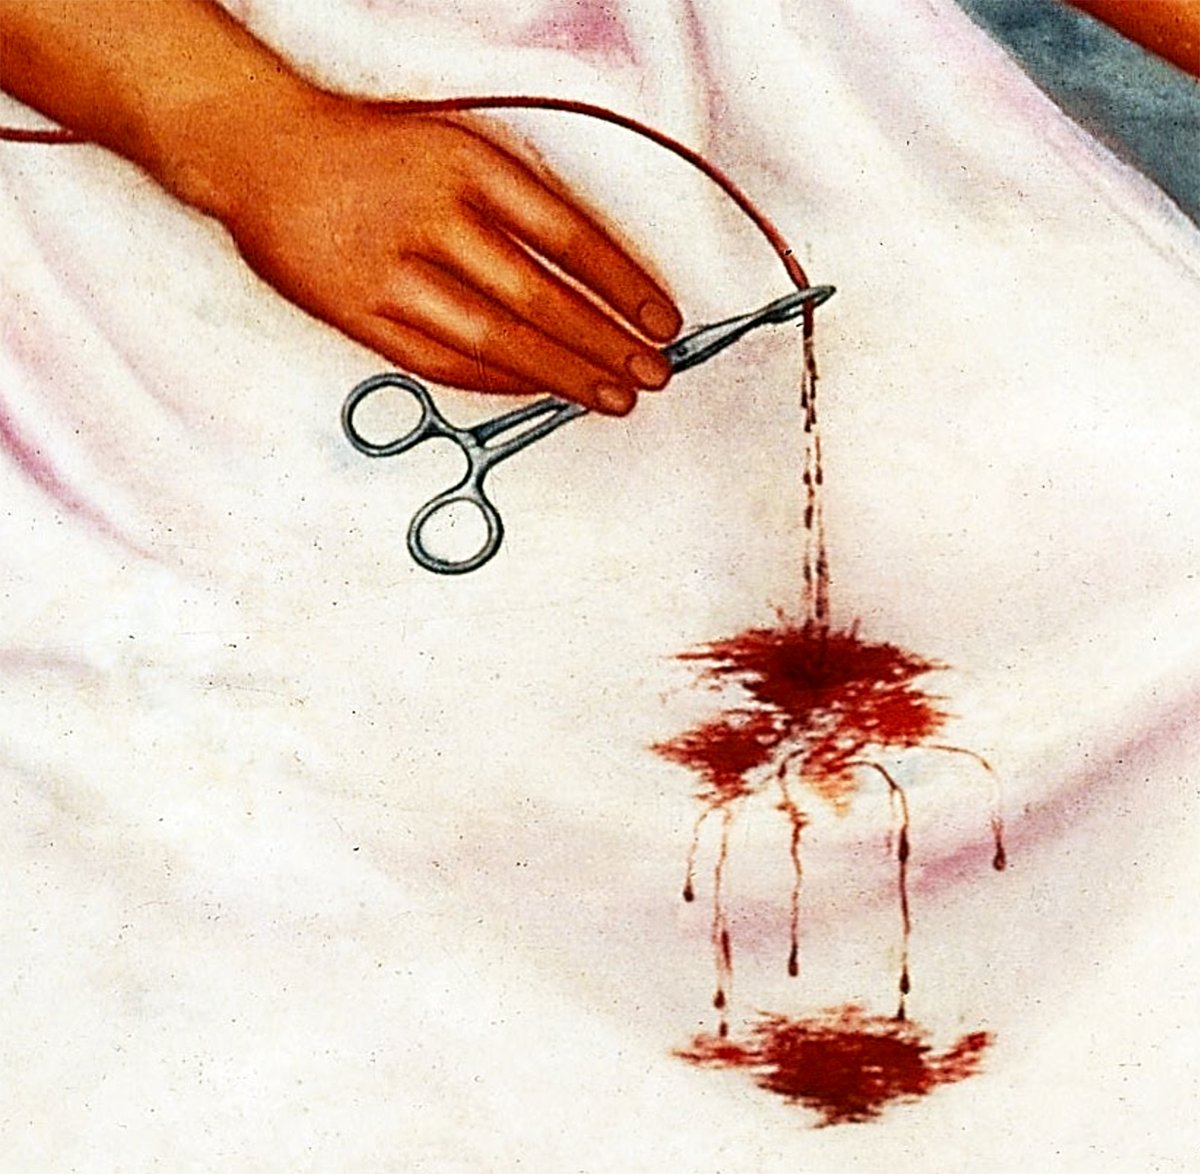 A close-up detail from Frida Kahlo's 1939 painting "The Two Fridas," focusing on a hand holding a pair of scissors, severing a vein. The cut vein is dripping blood onto the white fabric of a dress, creating a stark contrast and symbolizing emotional pain and separation. The image captures the intense and raw emotion that is characteristic of Kahlo's work.